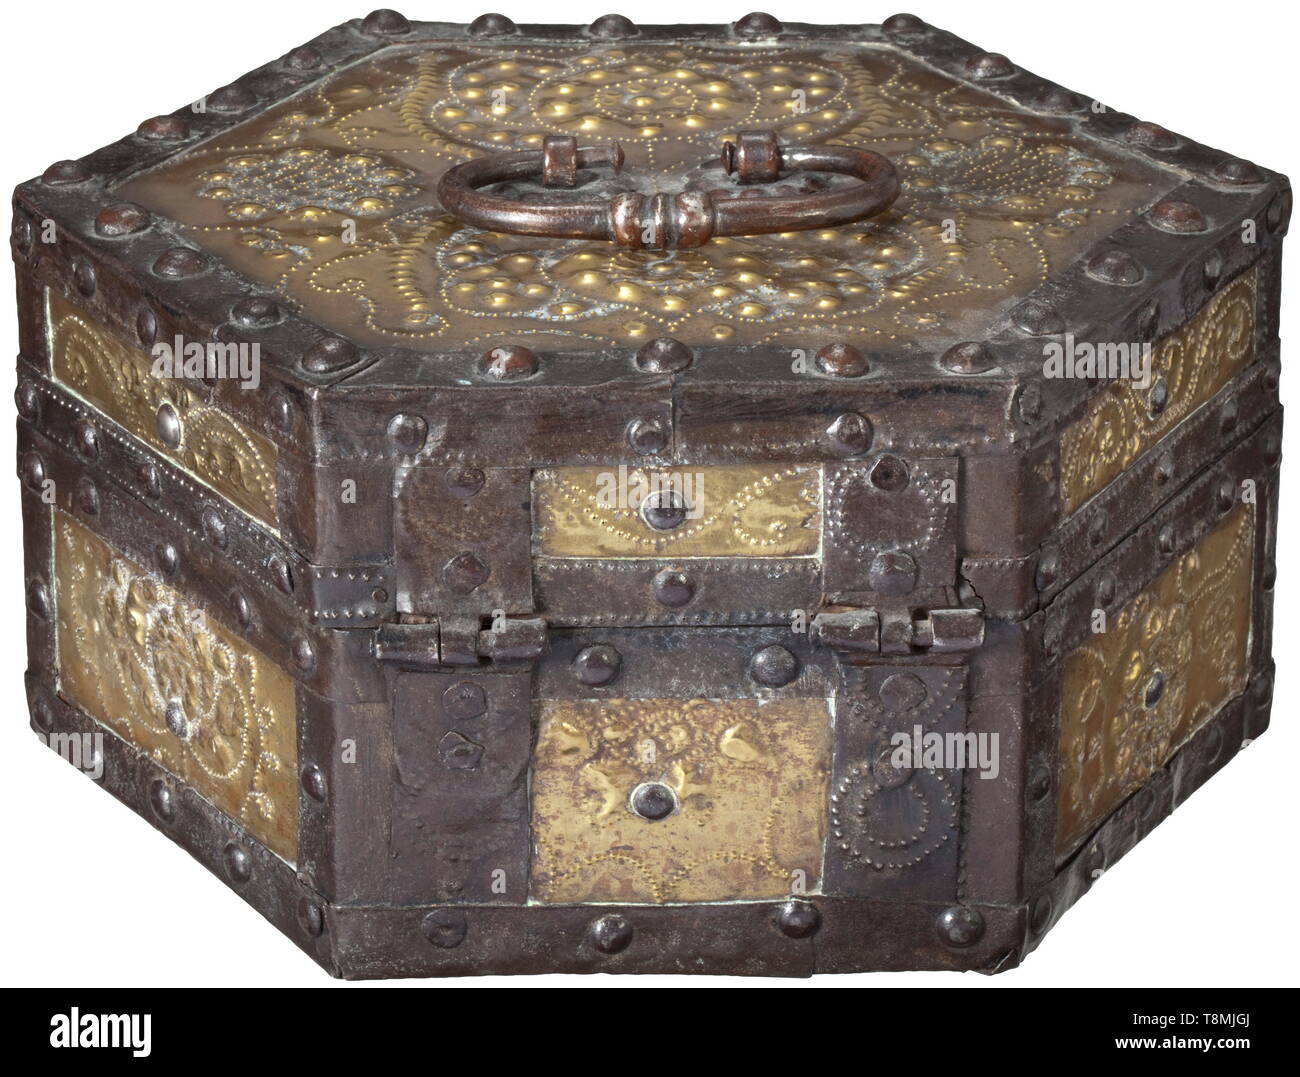 A Dutch hexagonal casket, circa 1680 Wooden body with riveted iron band fittings, the sections applied with finely embossed sheet brass. Obverse lock with two star-shaped brass studs, hollow shank key. The hinged lid with movable iron handle. The interior lined with greenish gobelin cloth featuring blossoms and tendrils. Size 14 x 27 x 23 cm. Provenance: A.J.G. Verster Collection, depicted in: Verster, A.J.G, Bronze - Altes Gerät aus Bronze, Messing und Kupfer, Hanover 1966, no. 56. historic, historical, handicrafts, handcraft, craft, object, obj, Additional-Rights-Clearance-Info-Not-Available Stock Photo